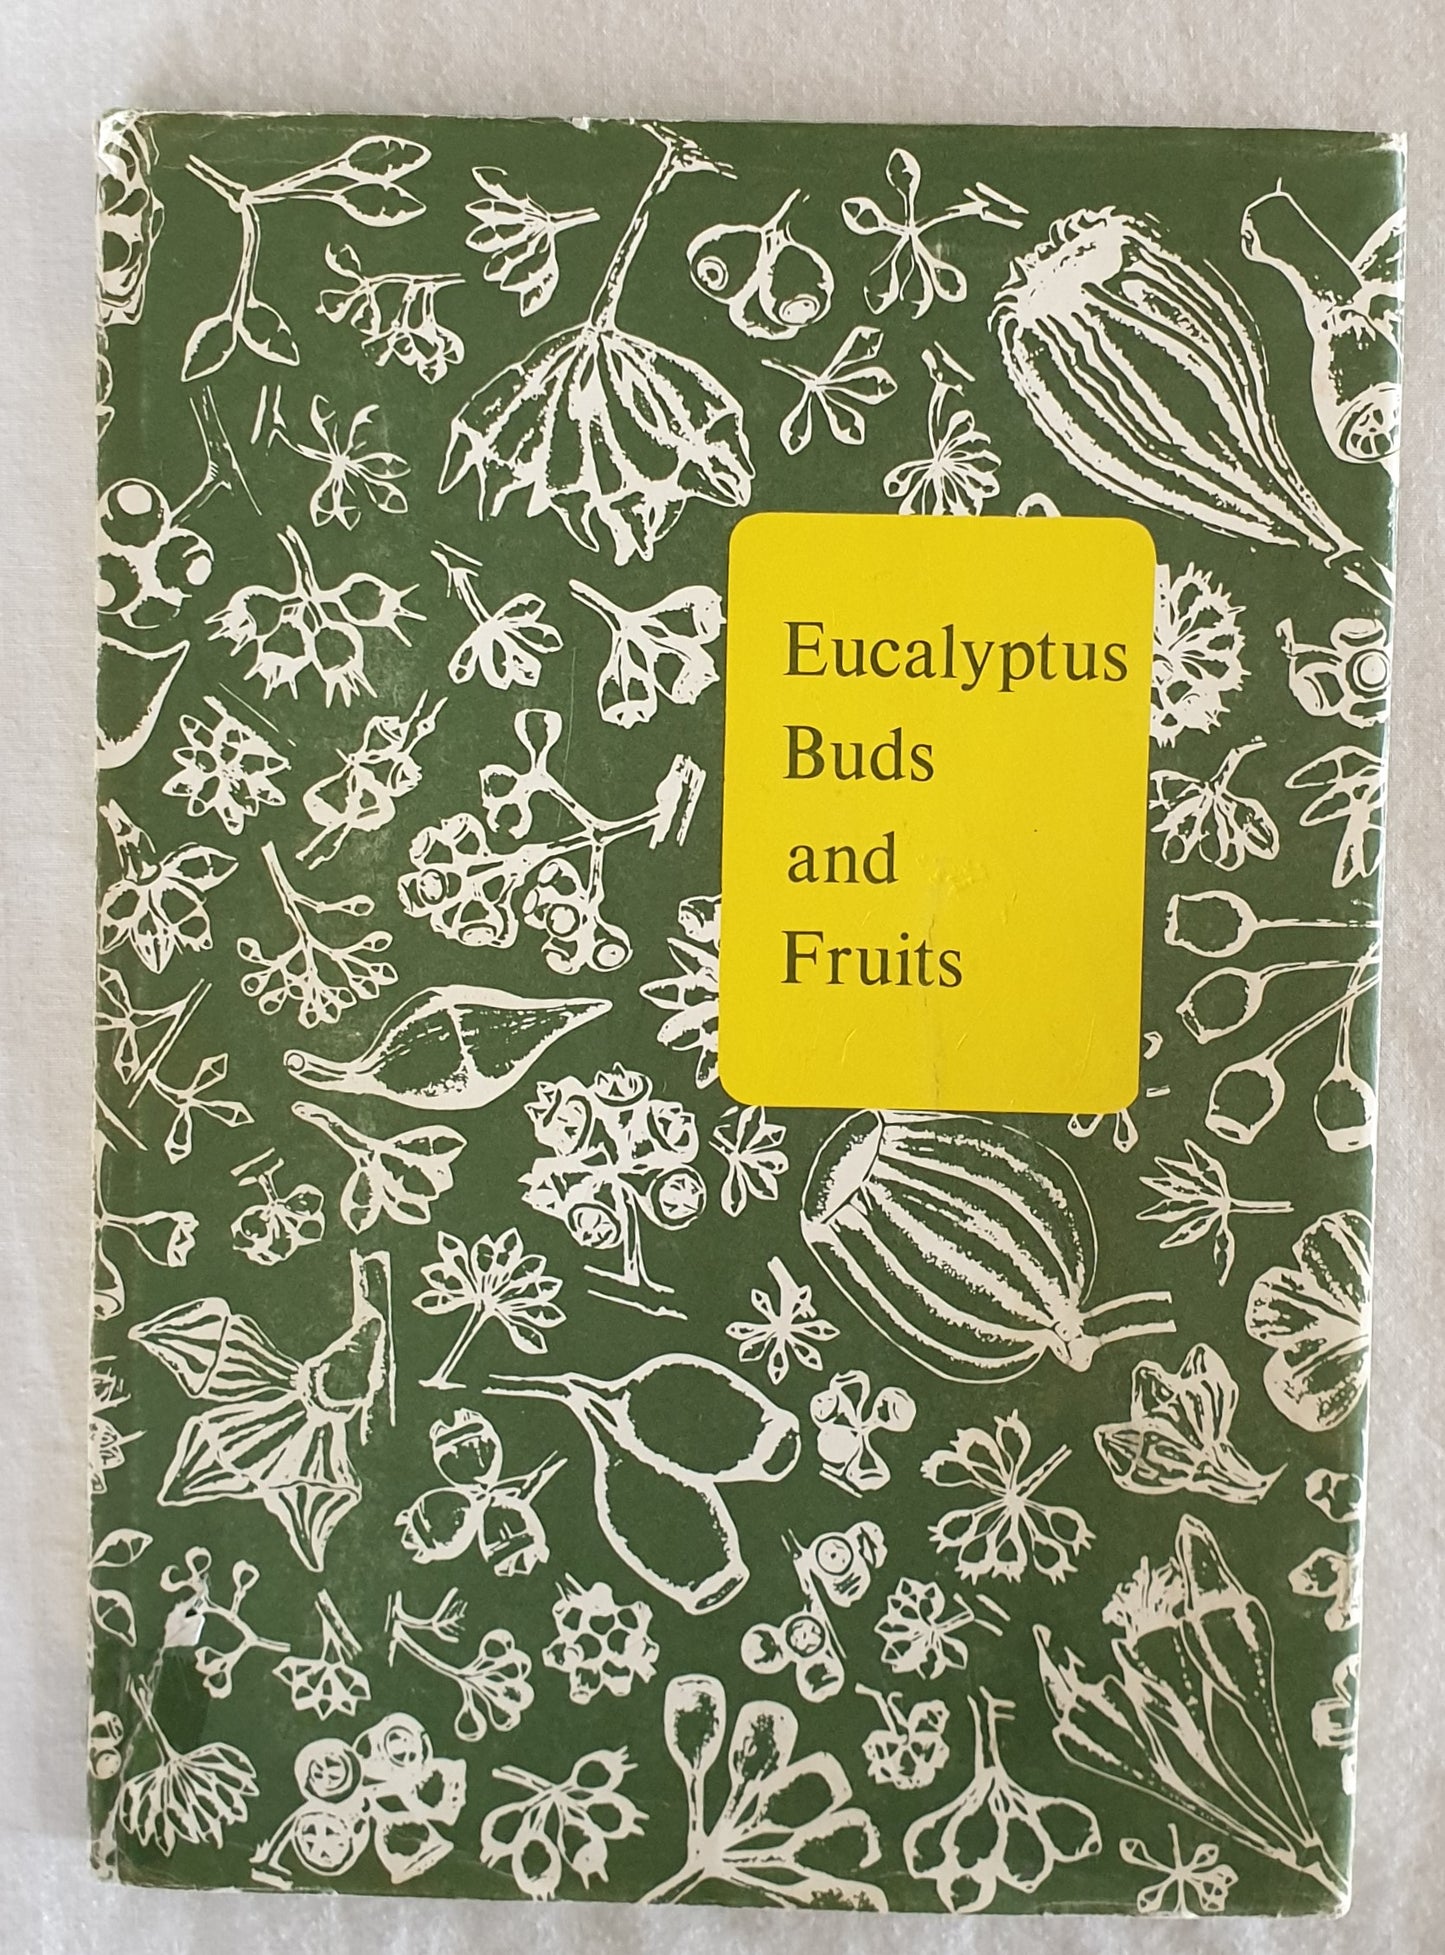 Eucalyptus Buds and Fruits by G. M. Chippendale